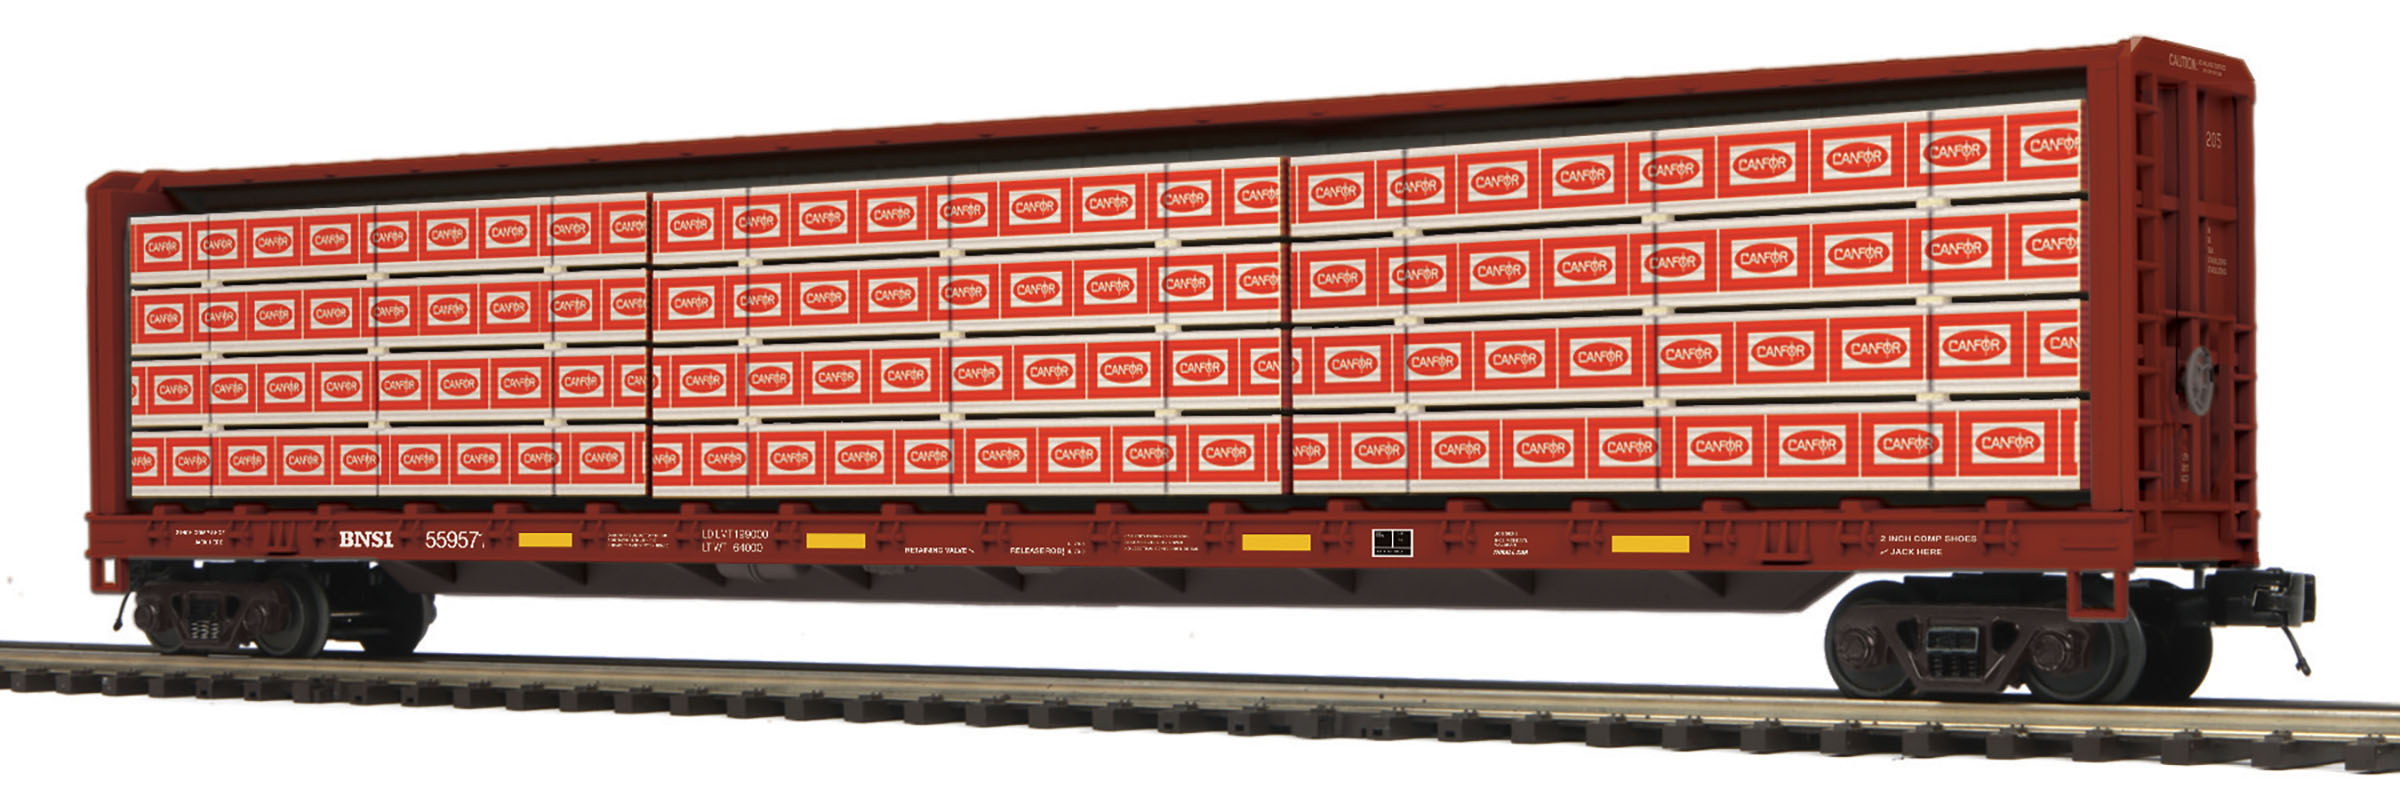 BNSF (Canfor) Center Beam Flat Car w/Lumber Load image